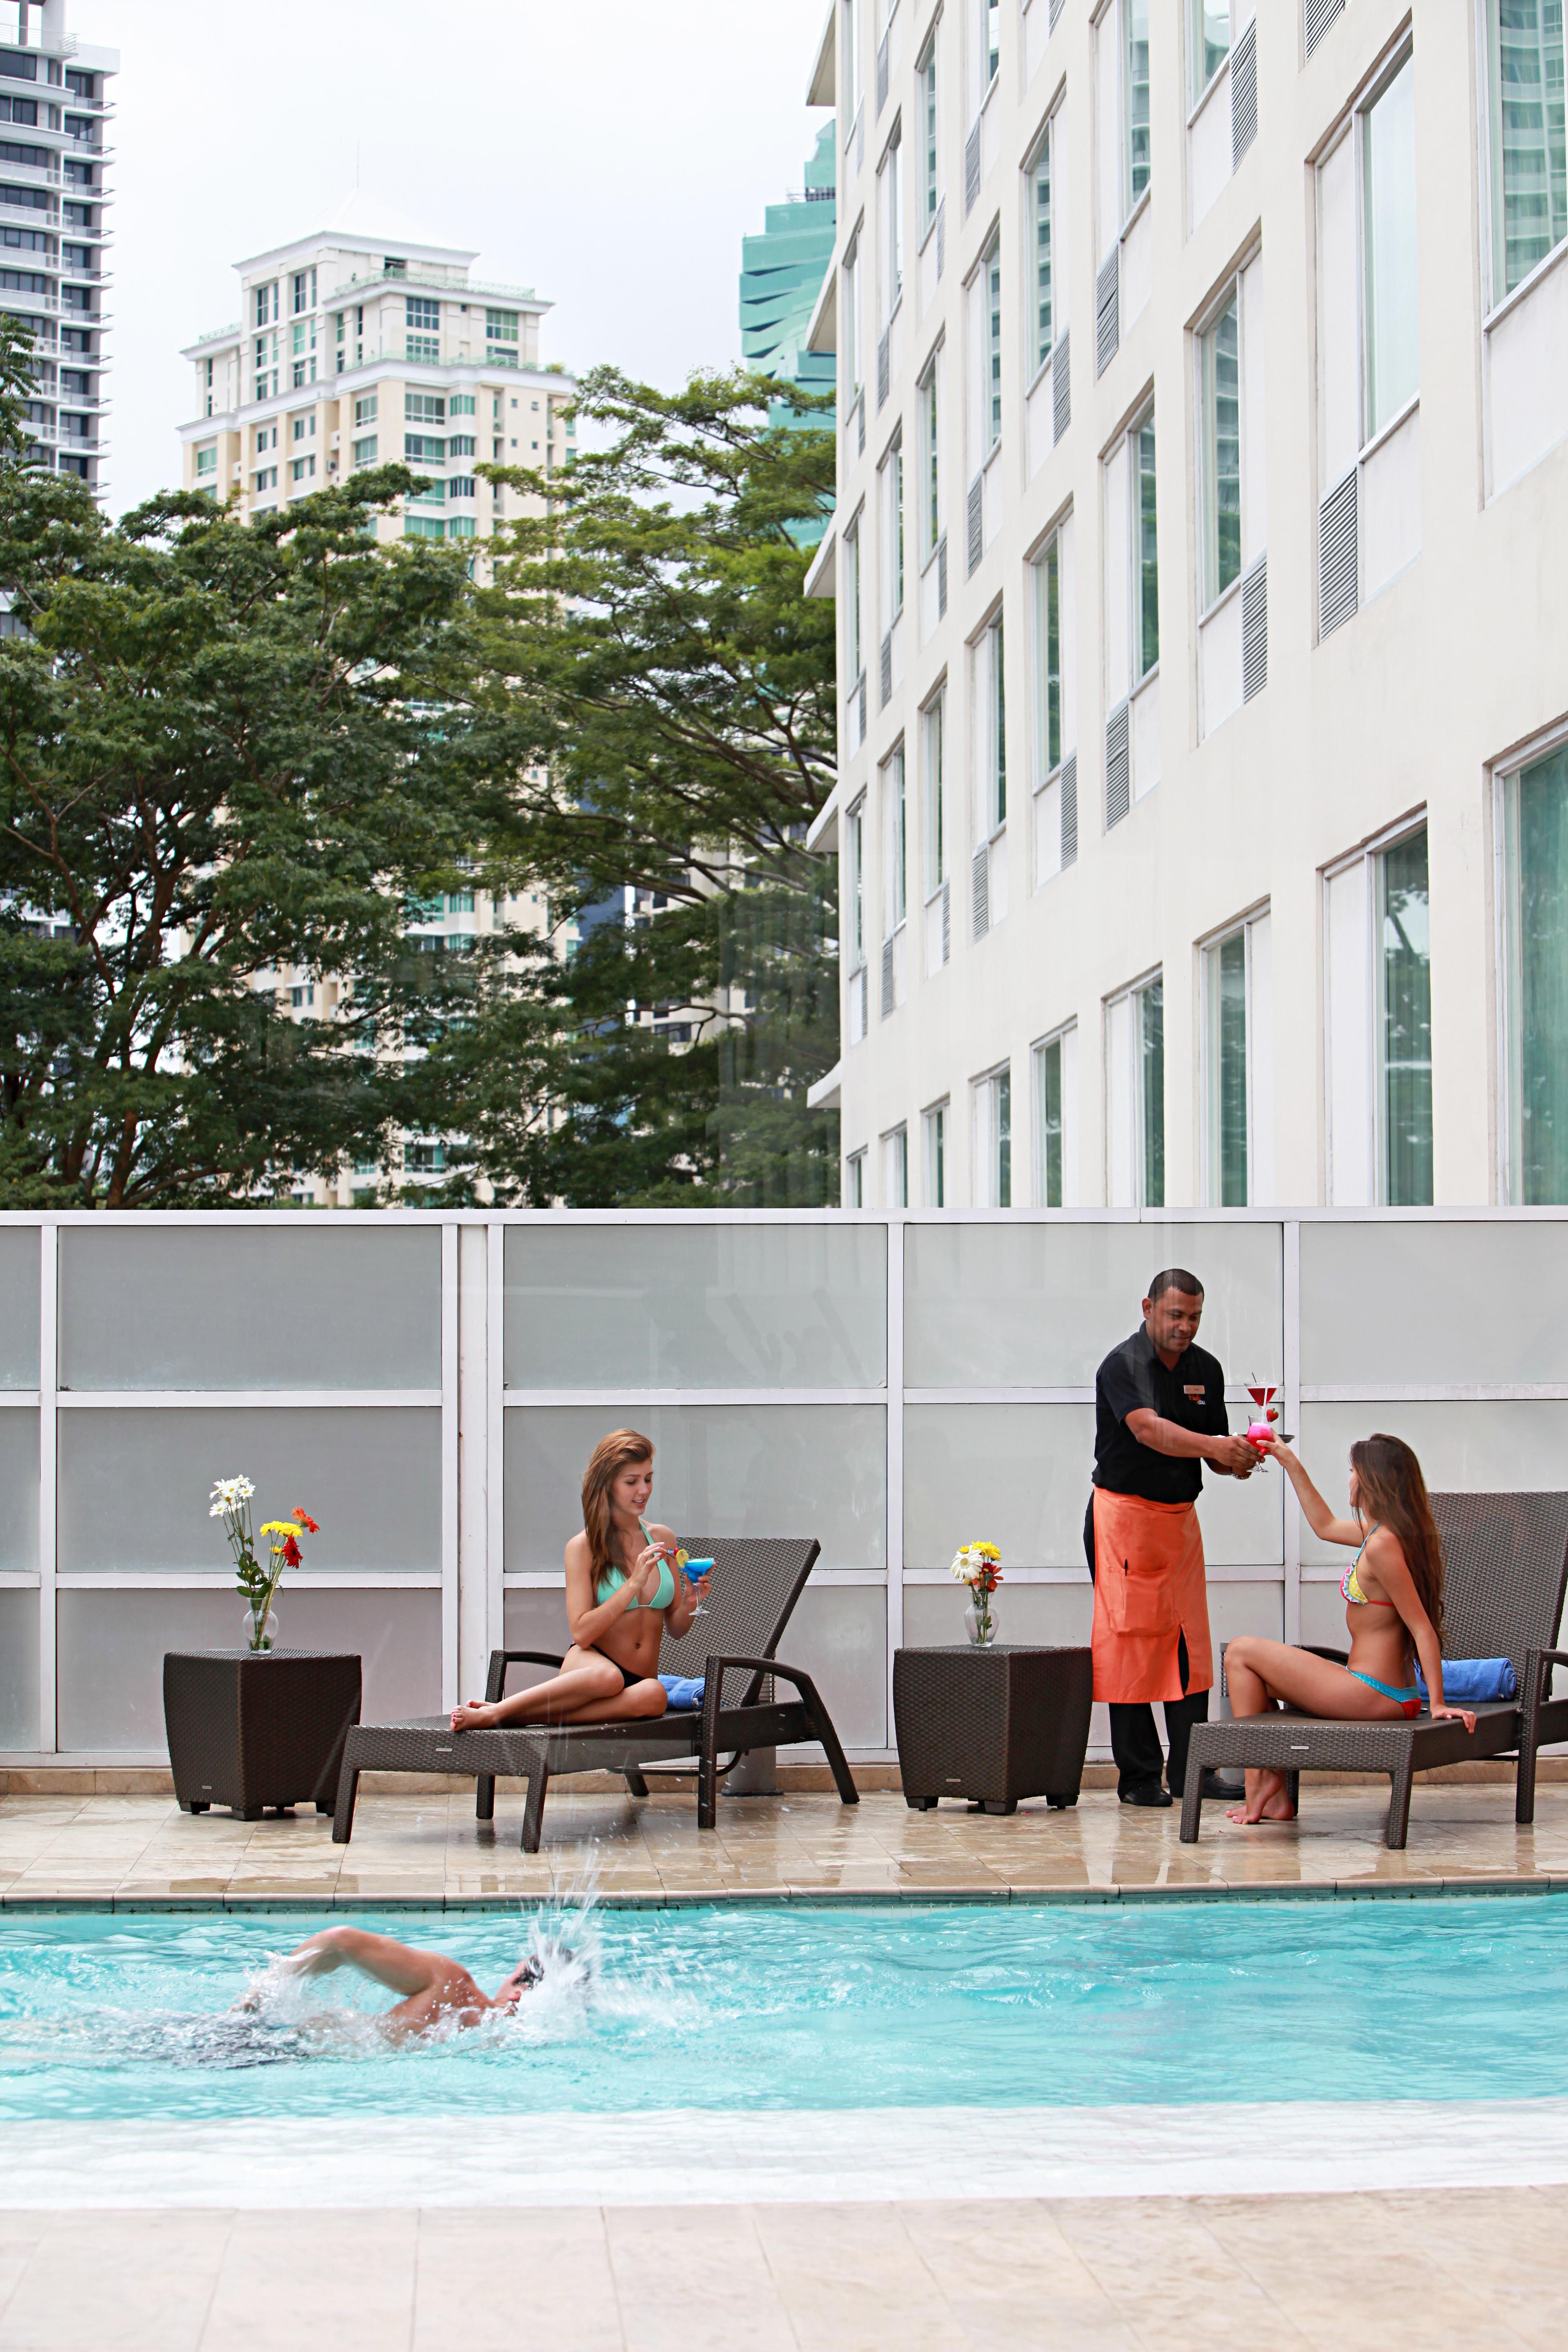 Courtyard By Marriott Panama Real Hotel Exterior photo